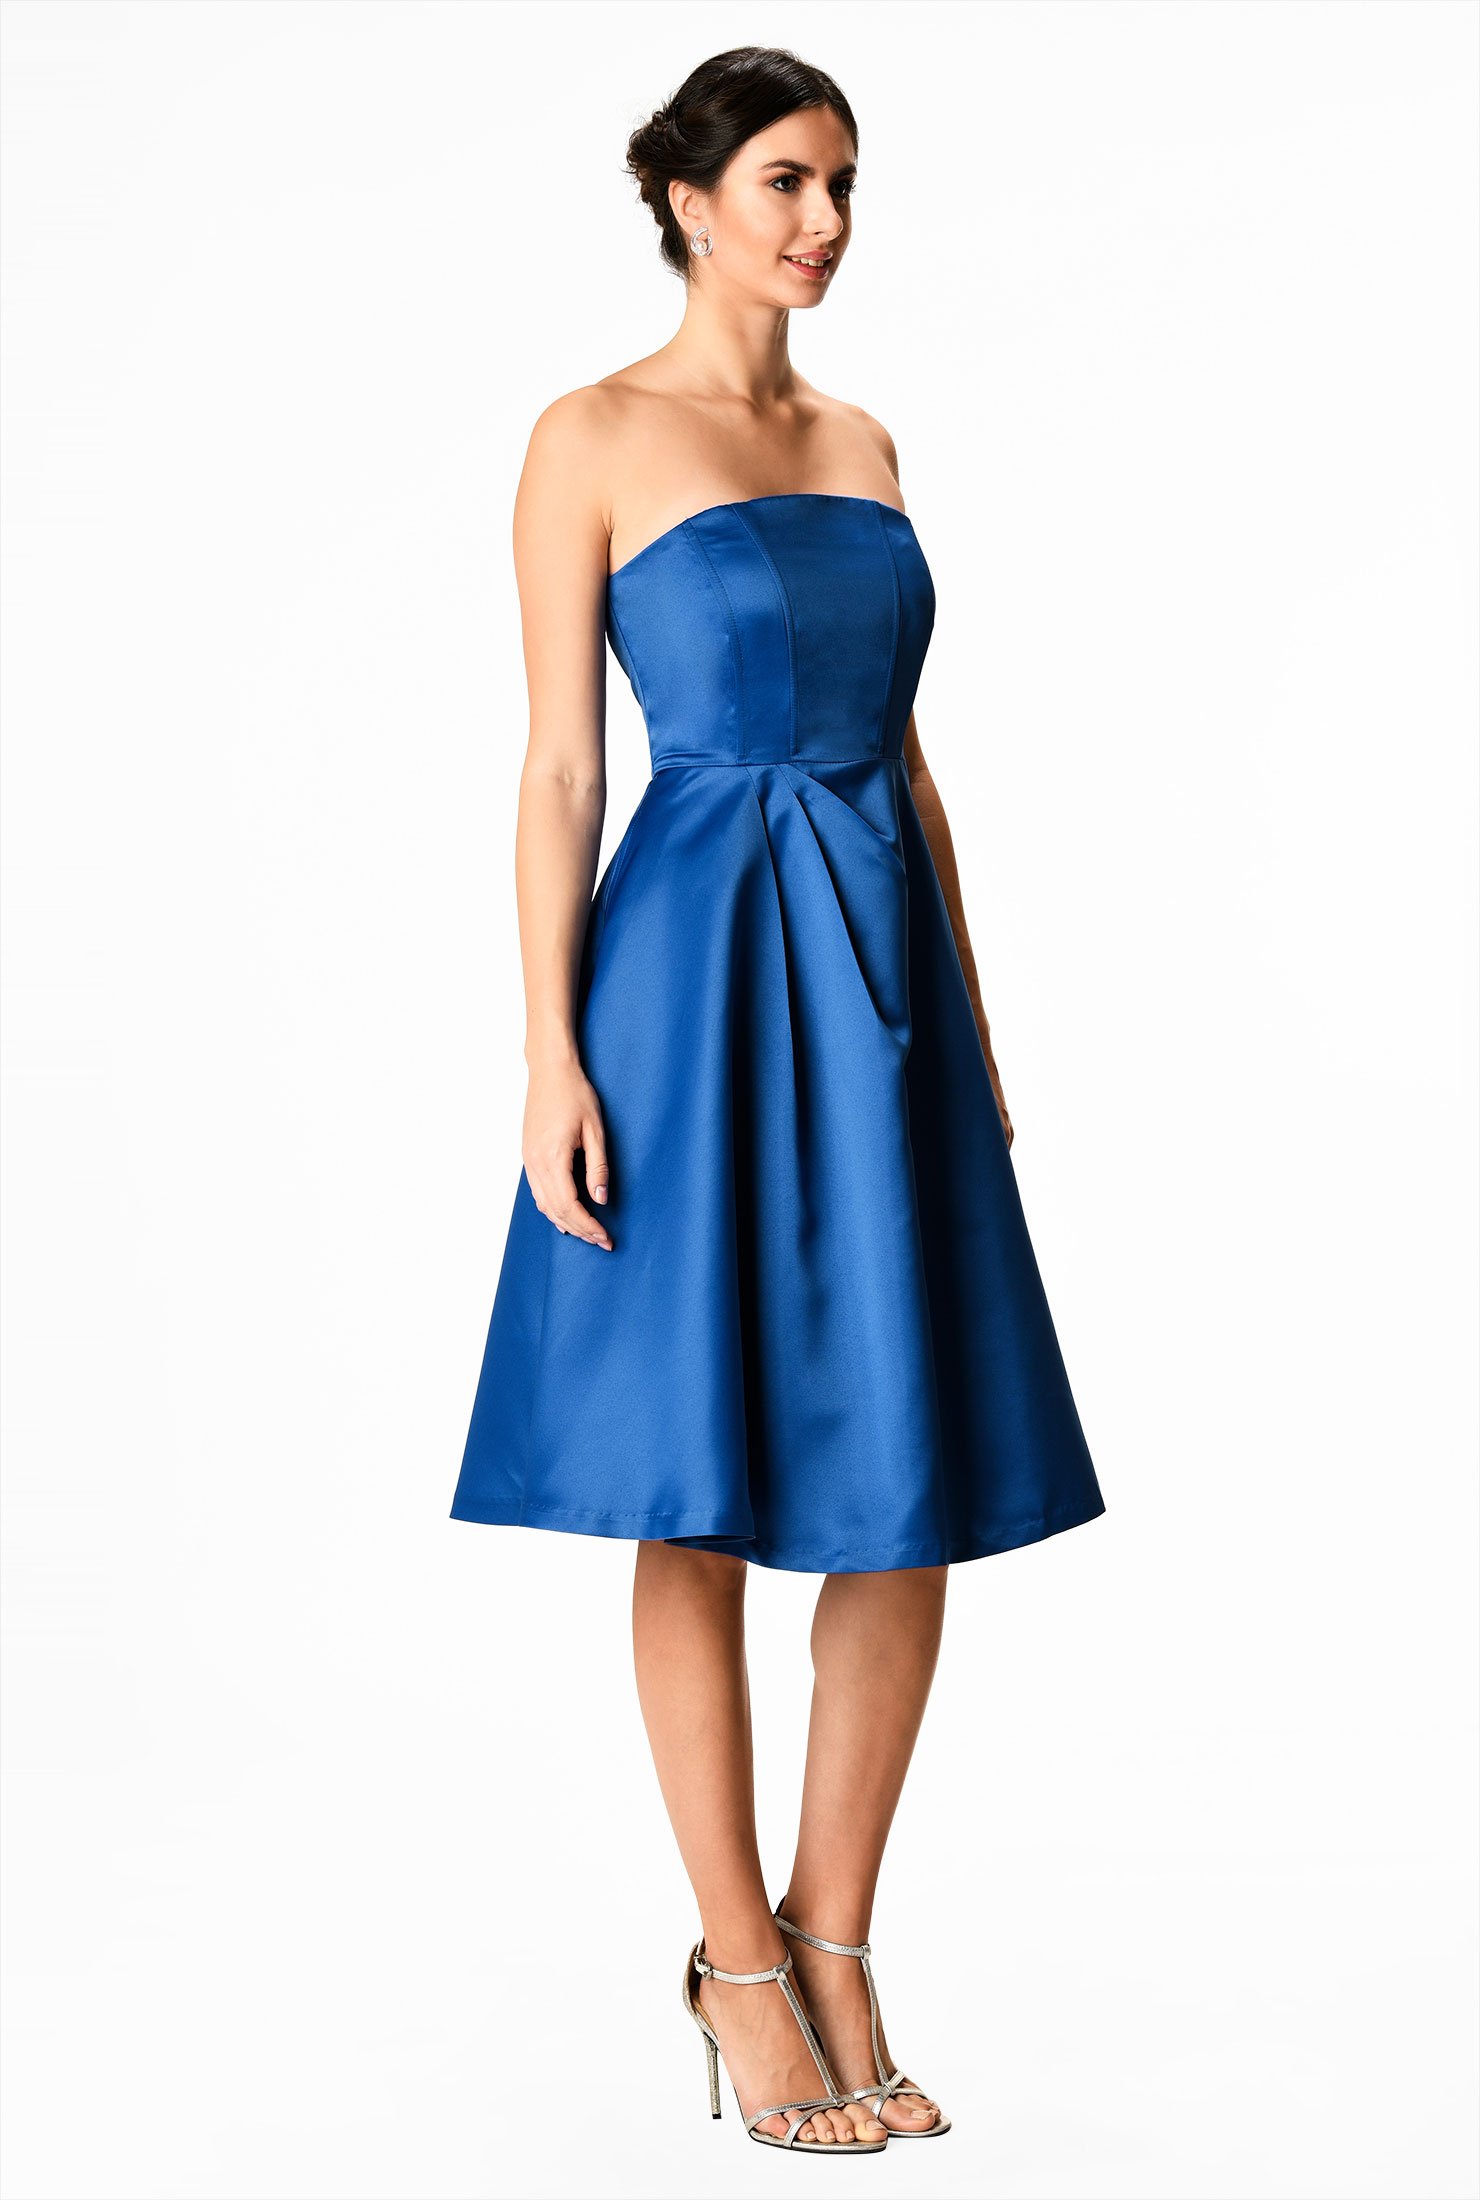 Our polydupioni dress is styled with a strapless bodice and flared out to a full skirt with asymmetric angled pleats.